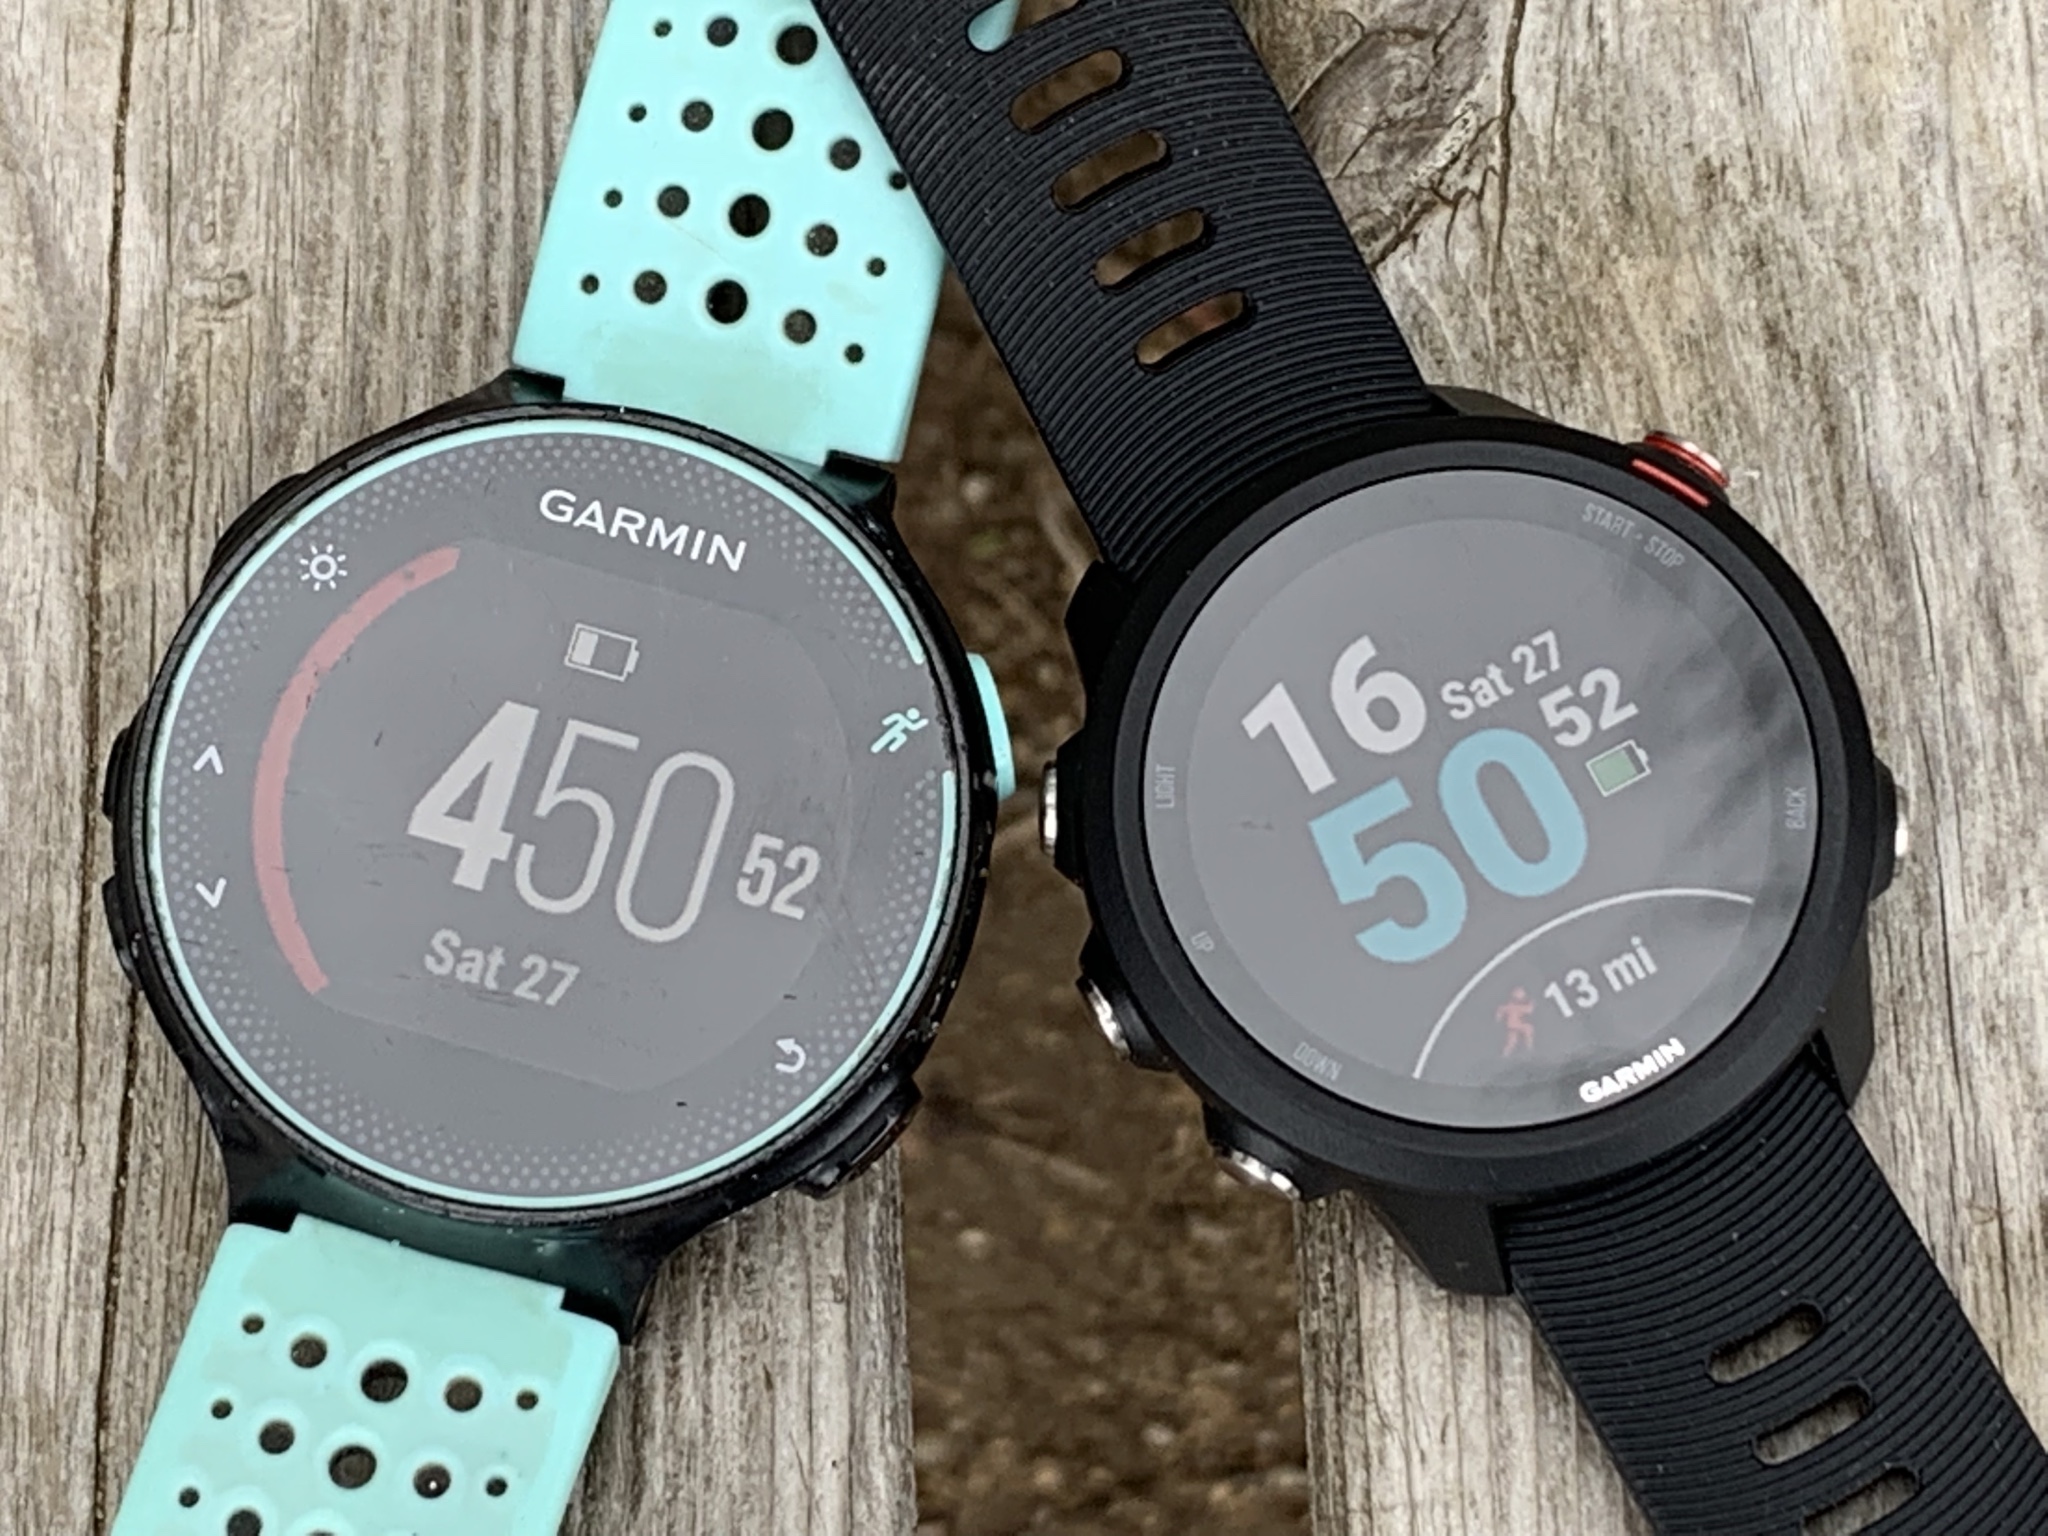 Garmin Forerunner 235 Versus 245: What Is New and What Is